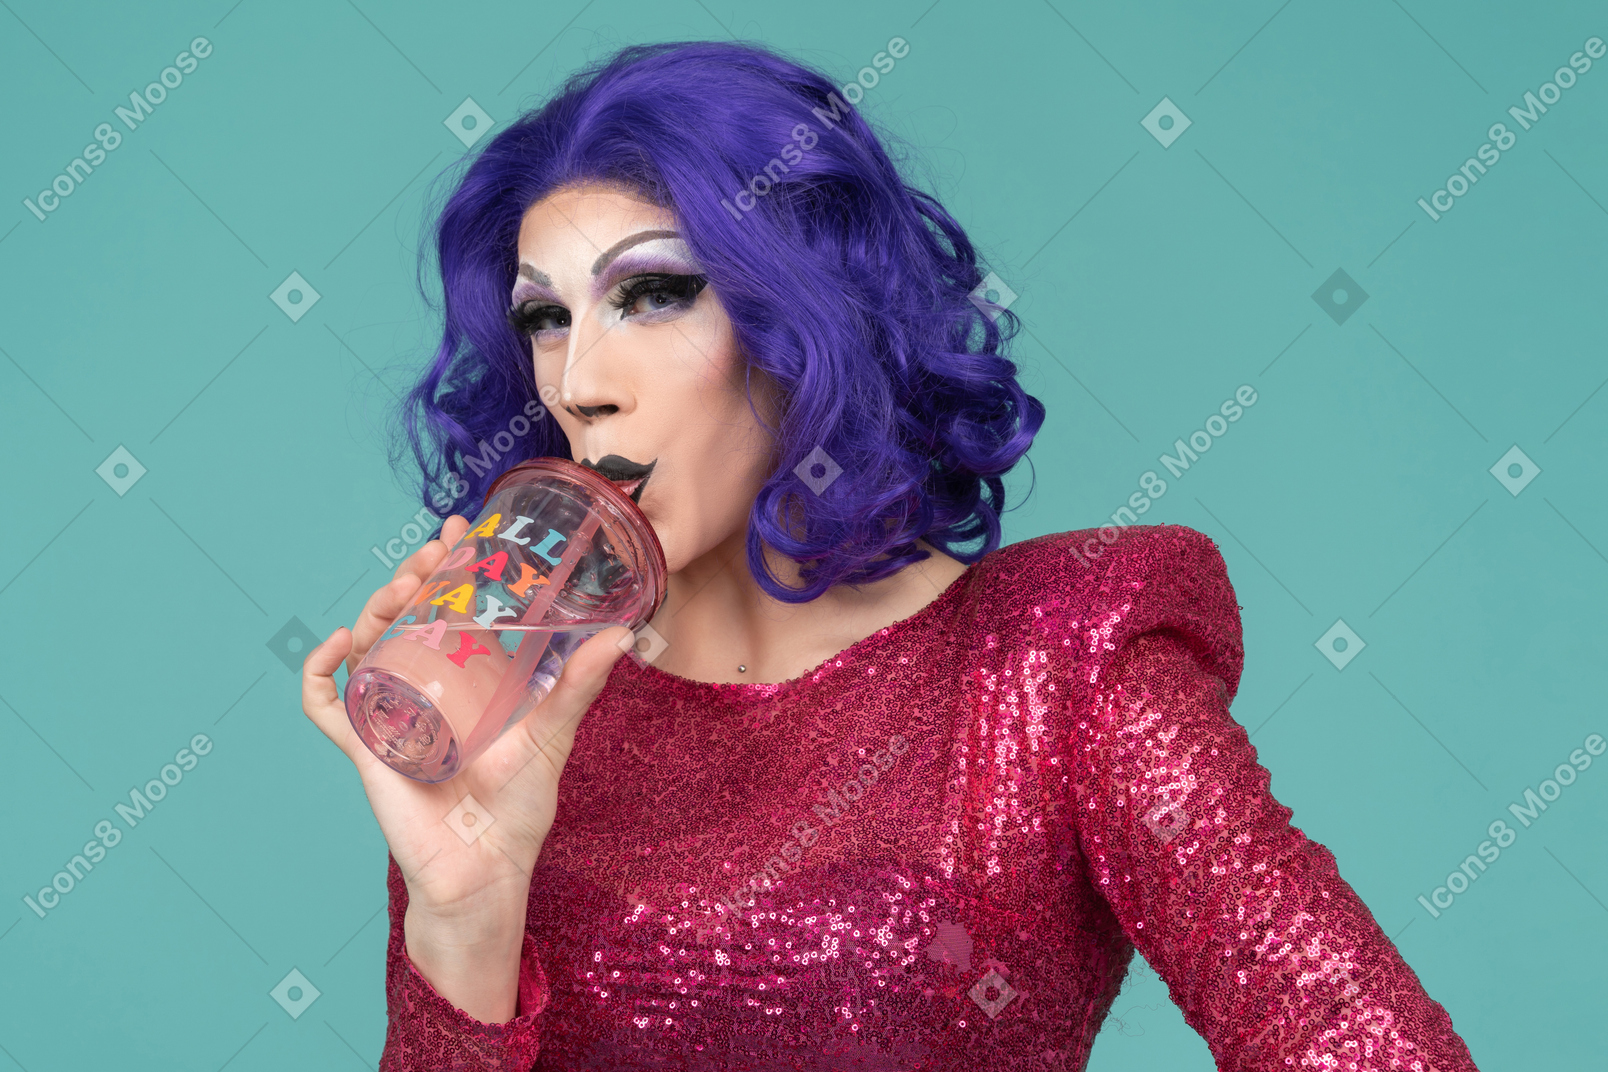 Close-up of a drag queen drinking through straw